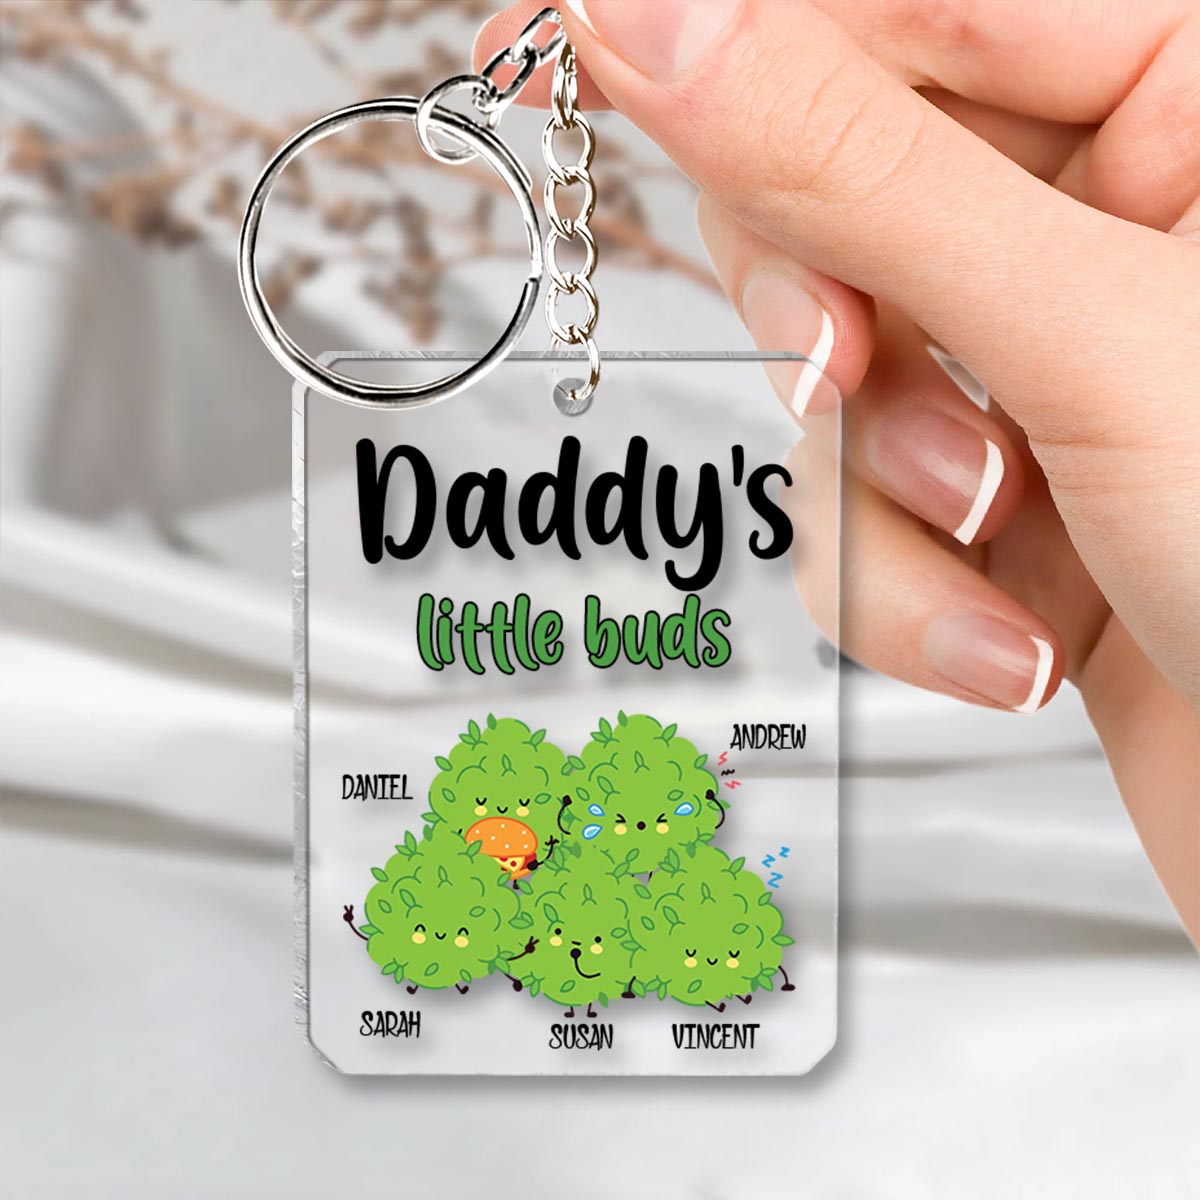 Daddy's Little Buds - Personalized Weed Transparent Keychain